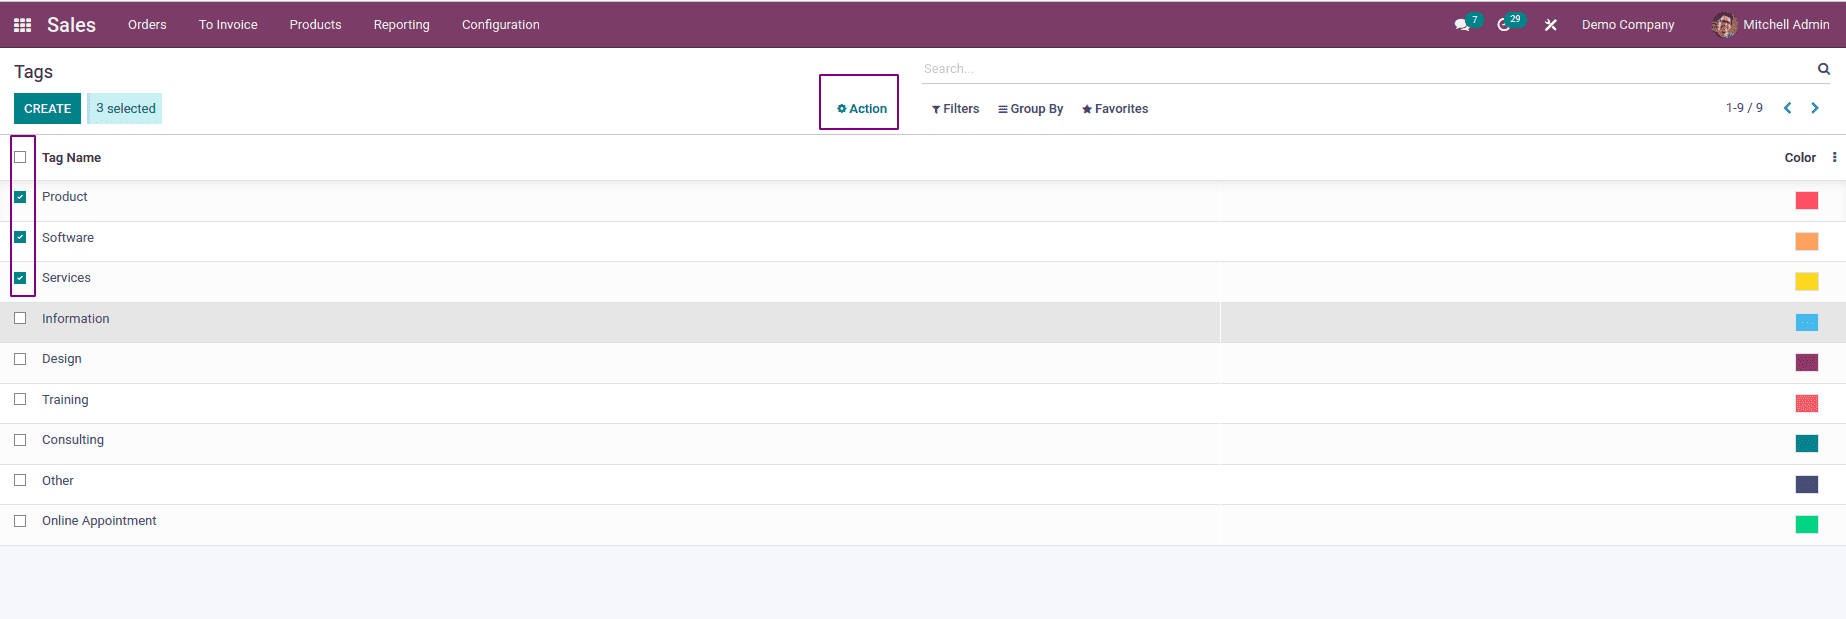 how-to-set-up-tags-in-odoo-15-sales-app-4-cybrosys